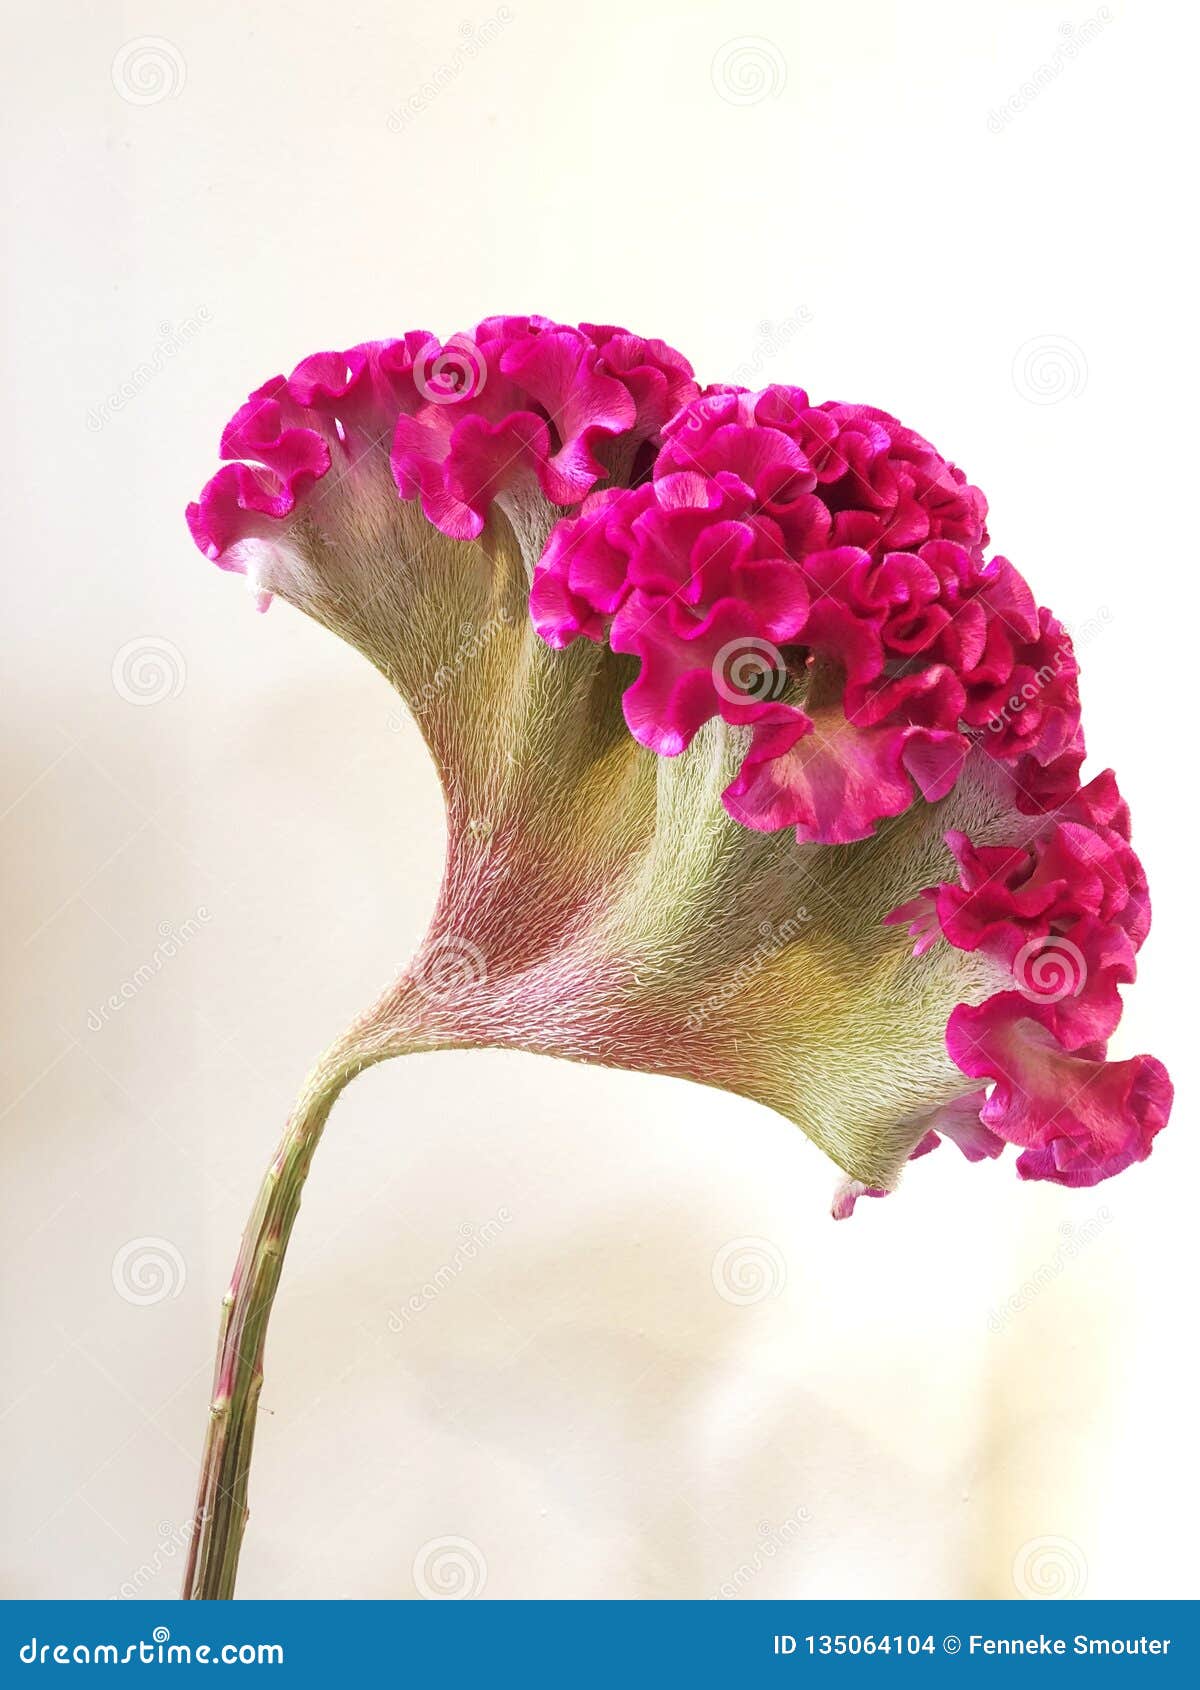 A Pink Celosia Cristata Flower Stock Photo Image Of Flowering Garden 135064104